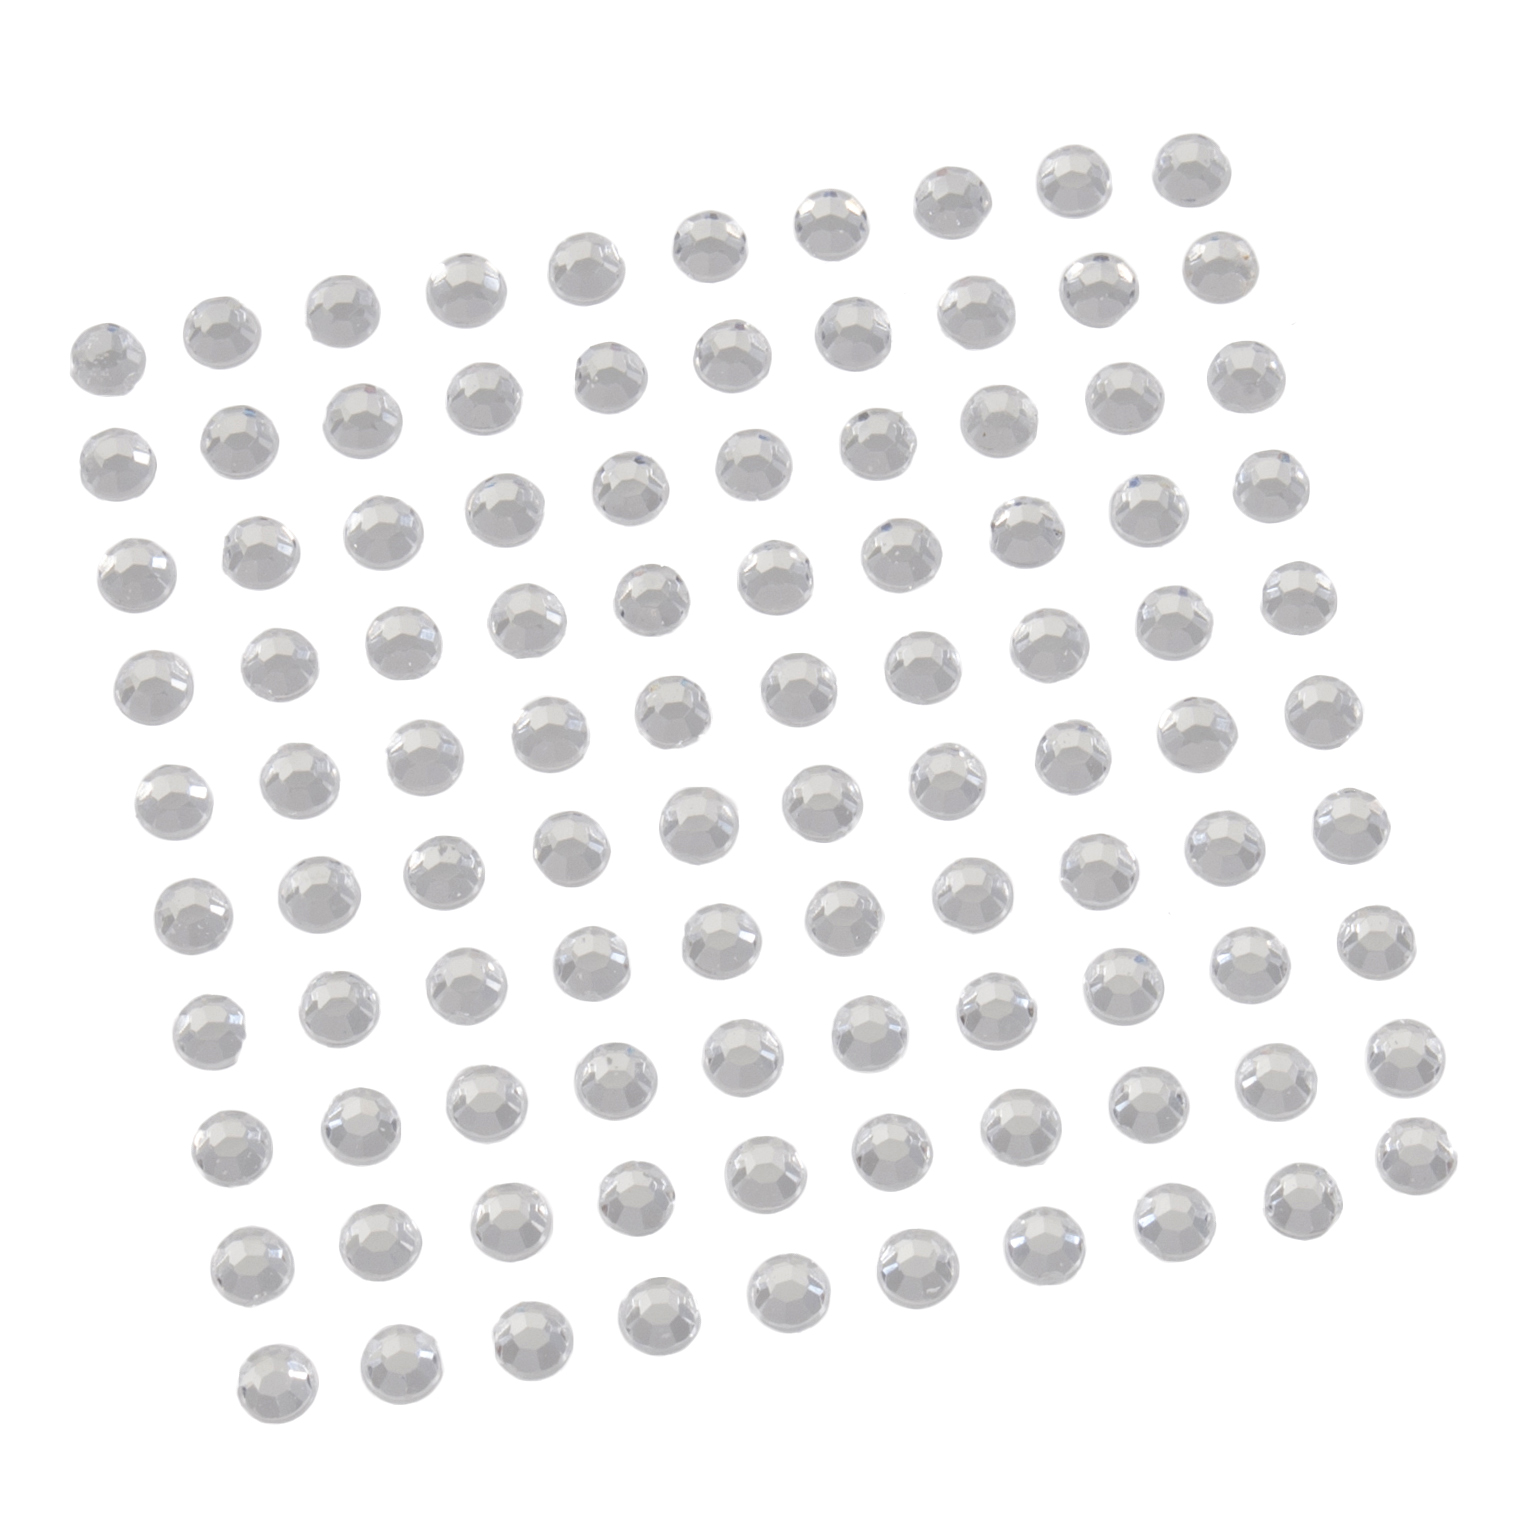 Bling Bling: Diamantes: 4mm: Clear - Trimits - Craft for Occasions ...